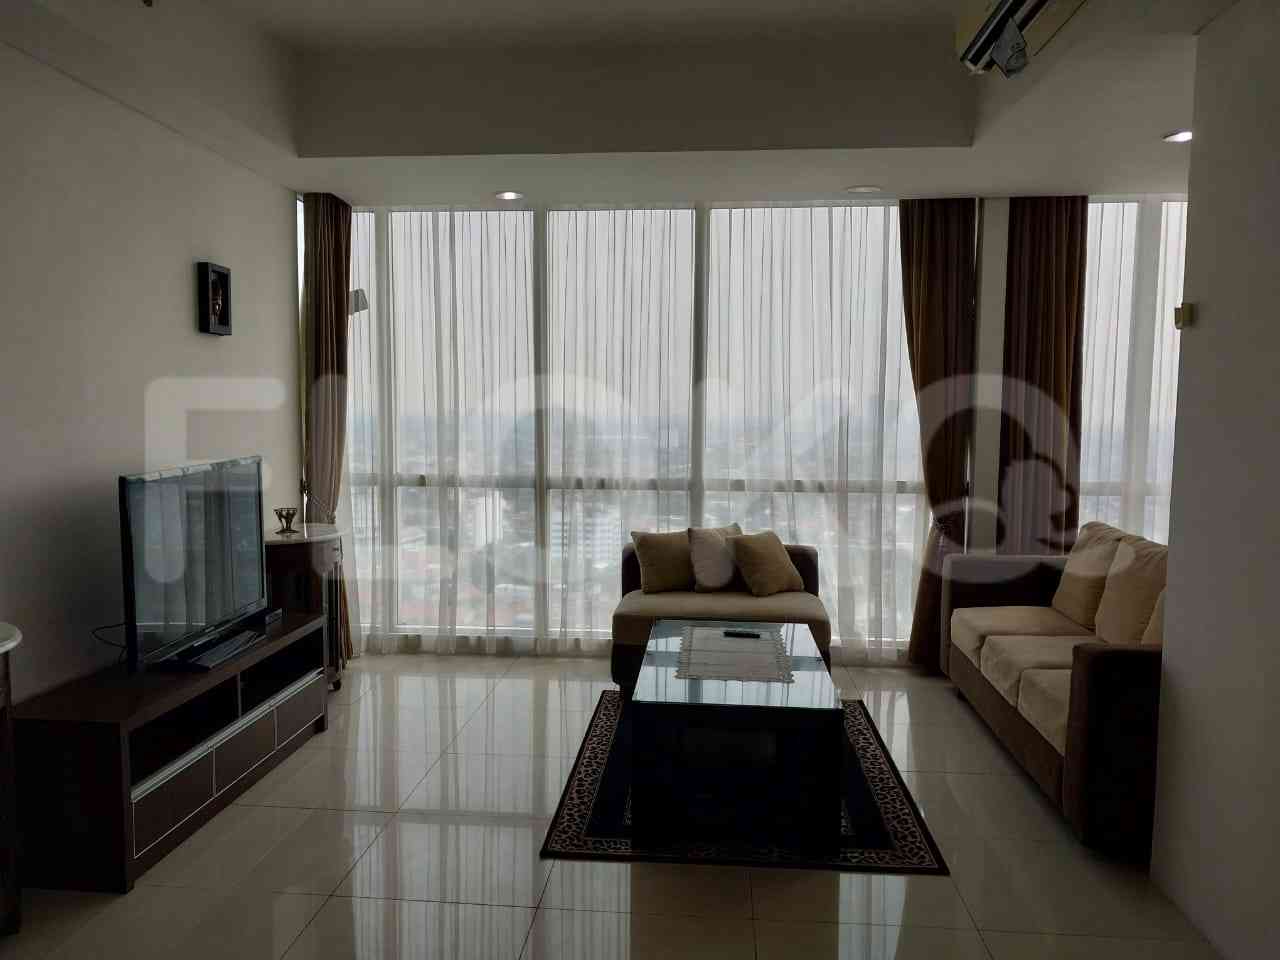 2 Bedroom on 20th Floor for Rent in Kemang Village Empire Tower - fke958 1